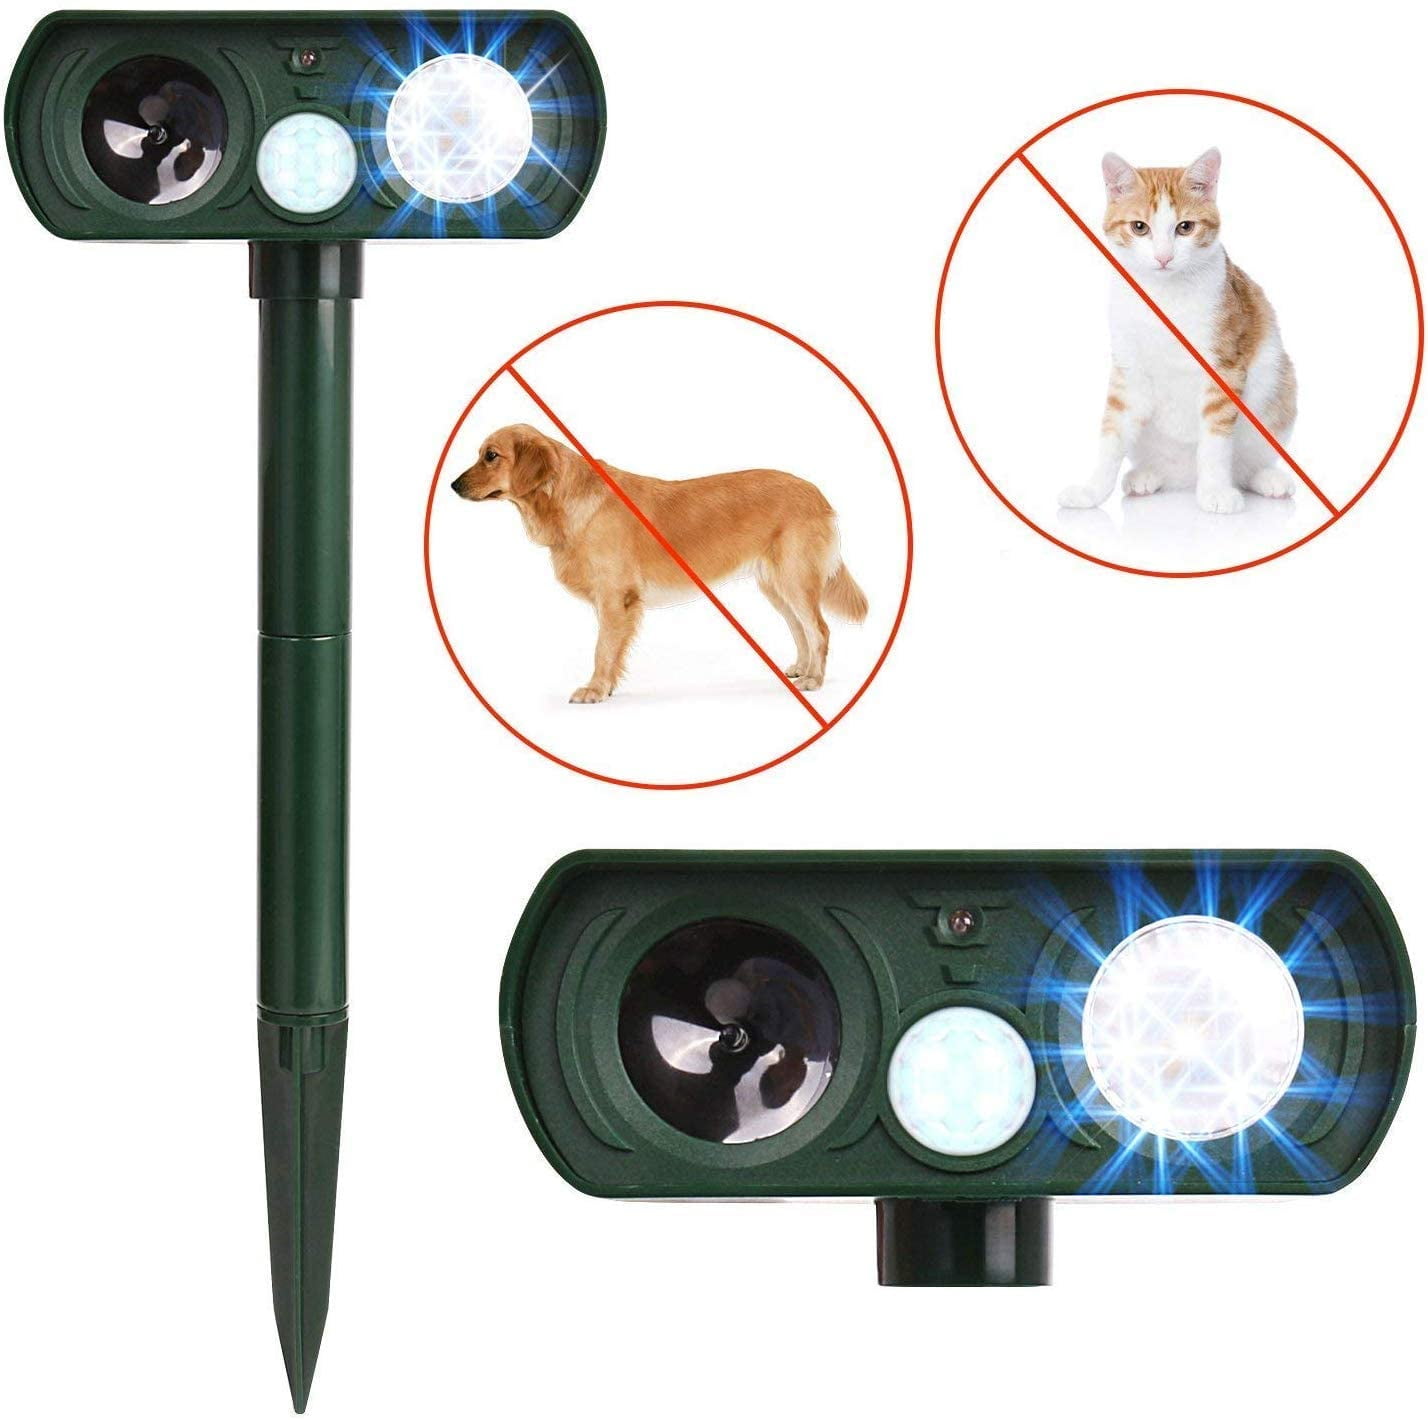 Dog Cat Repellent, Ultrasonic Animal Repellent with Motion Sensor and